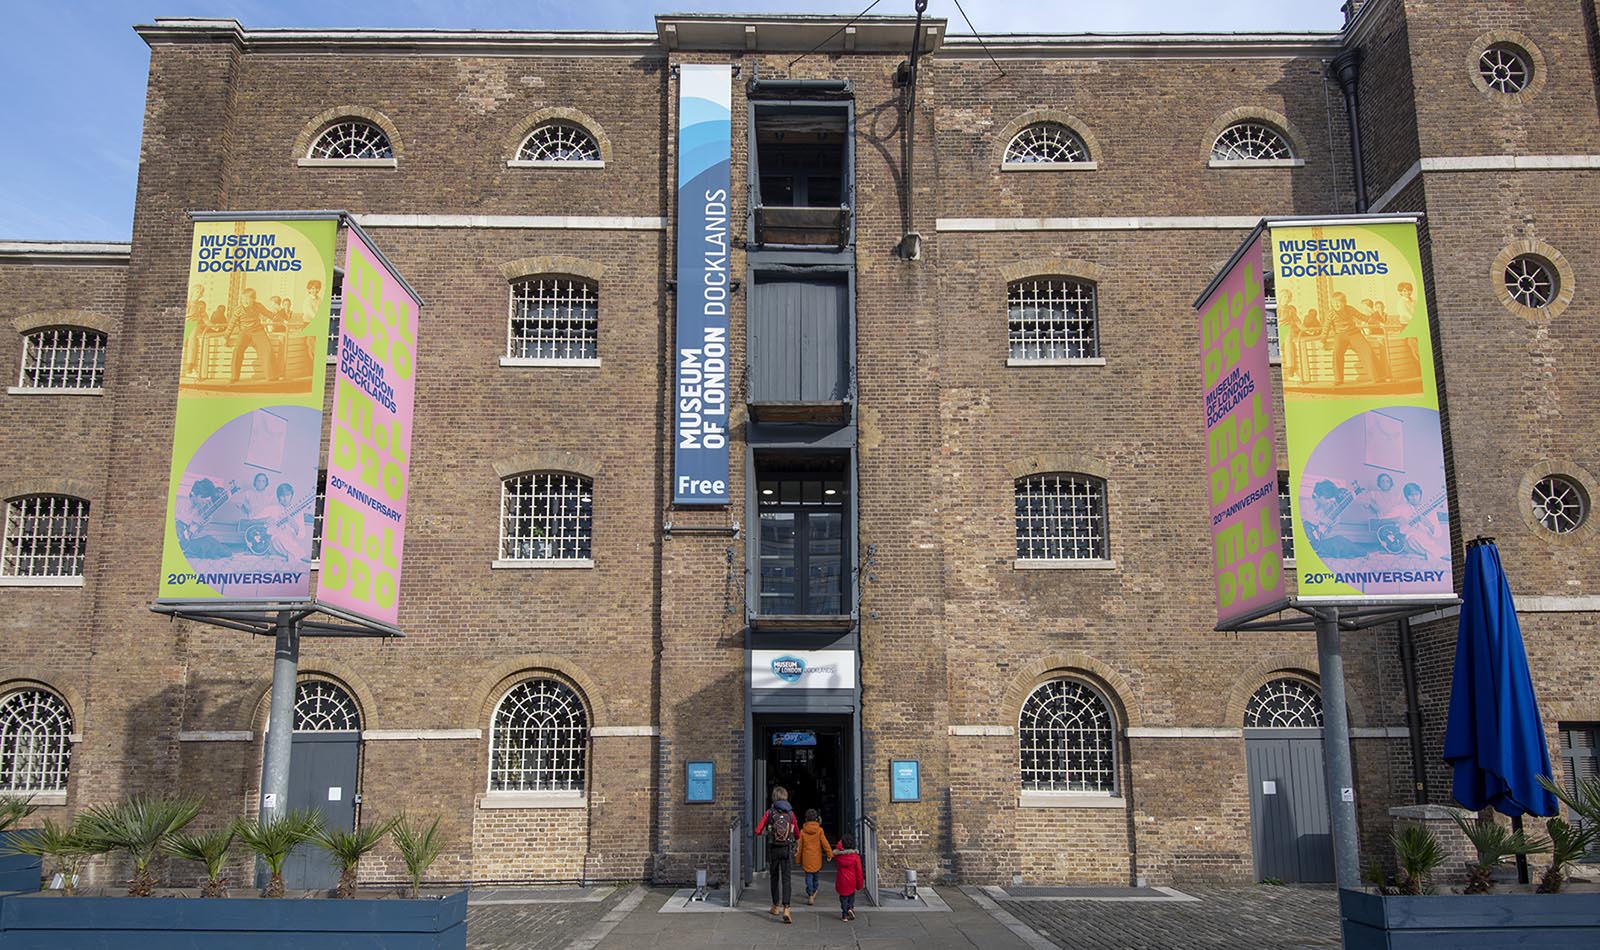 The exterior of Museum of London Docklands